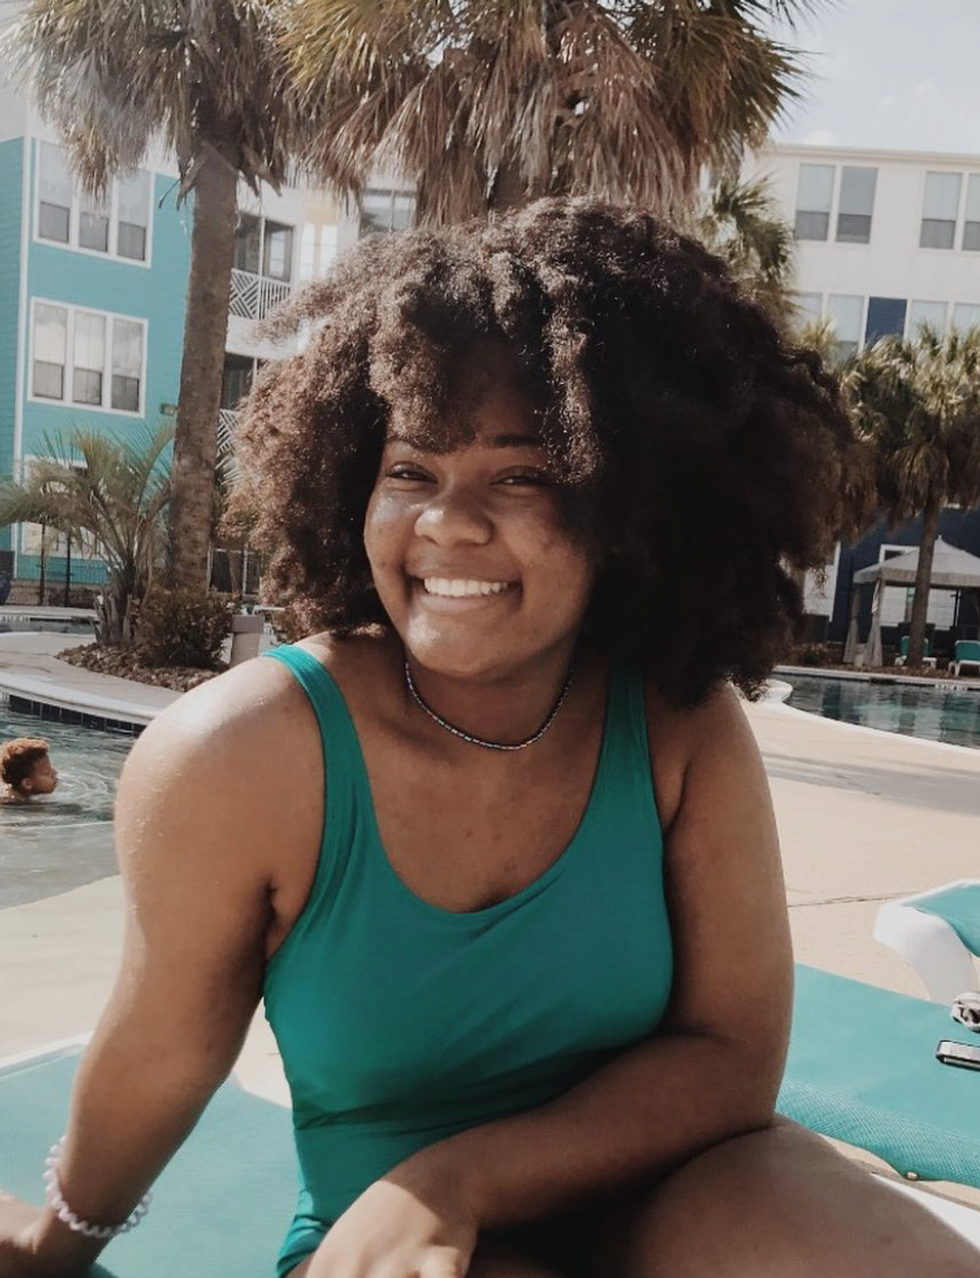 The Stigma Of Natural Hair Needs To Be Overcome, ASAP